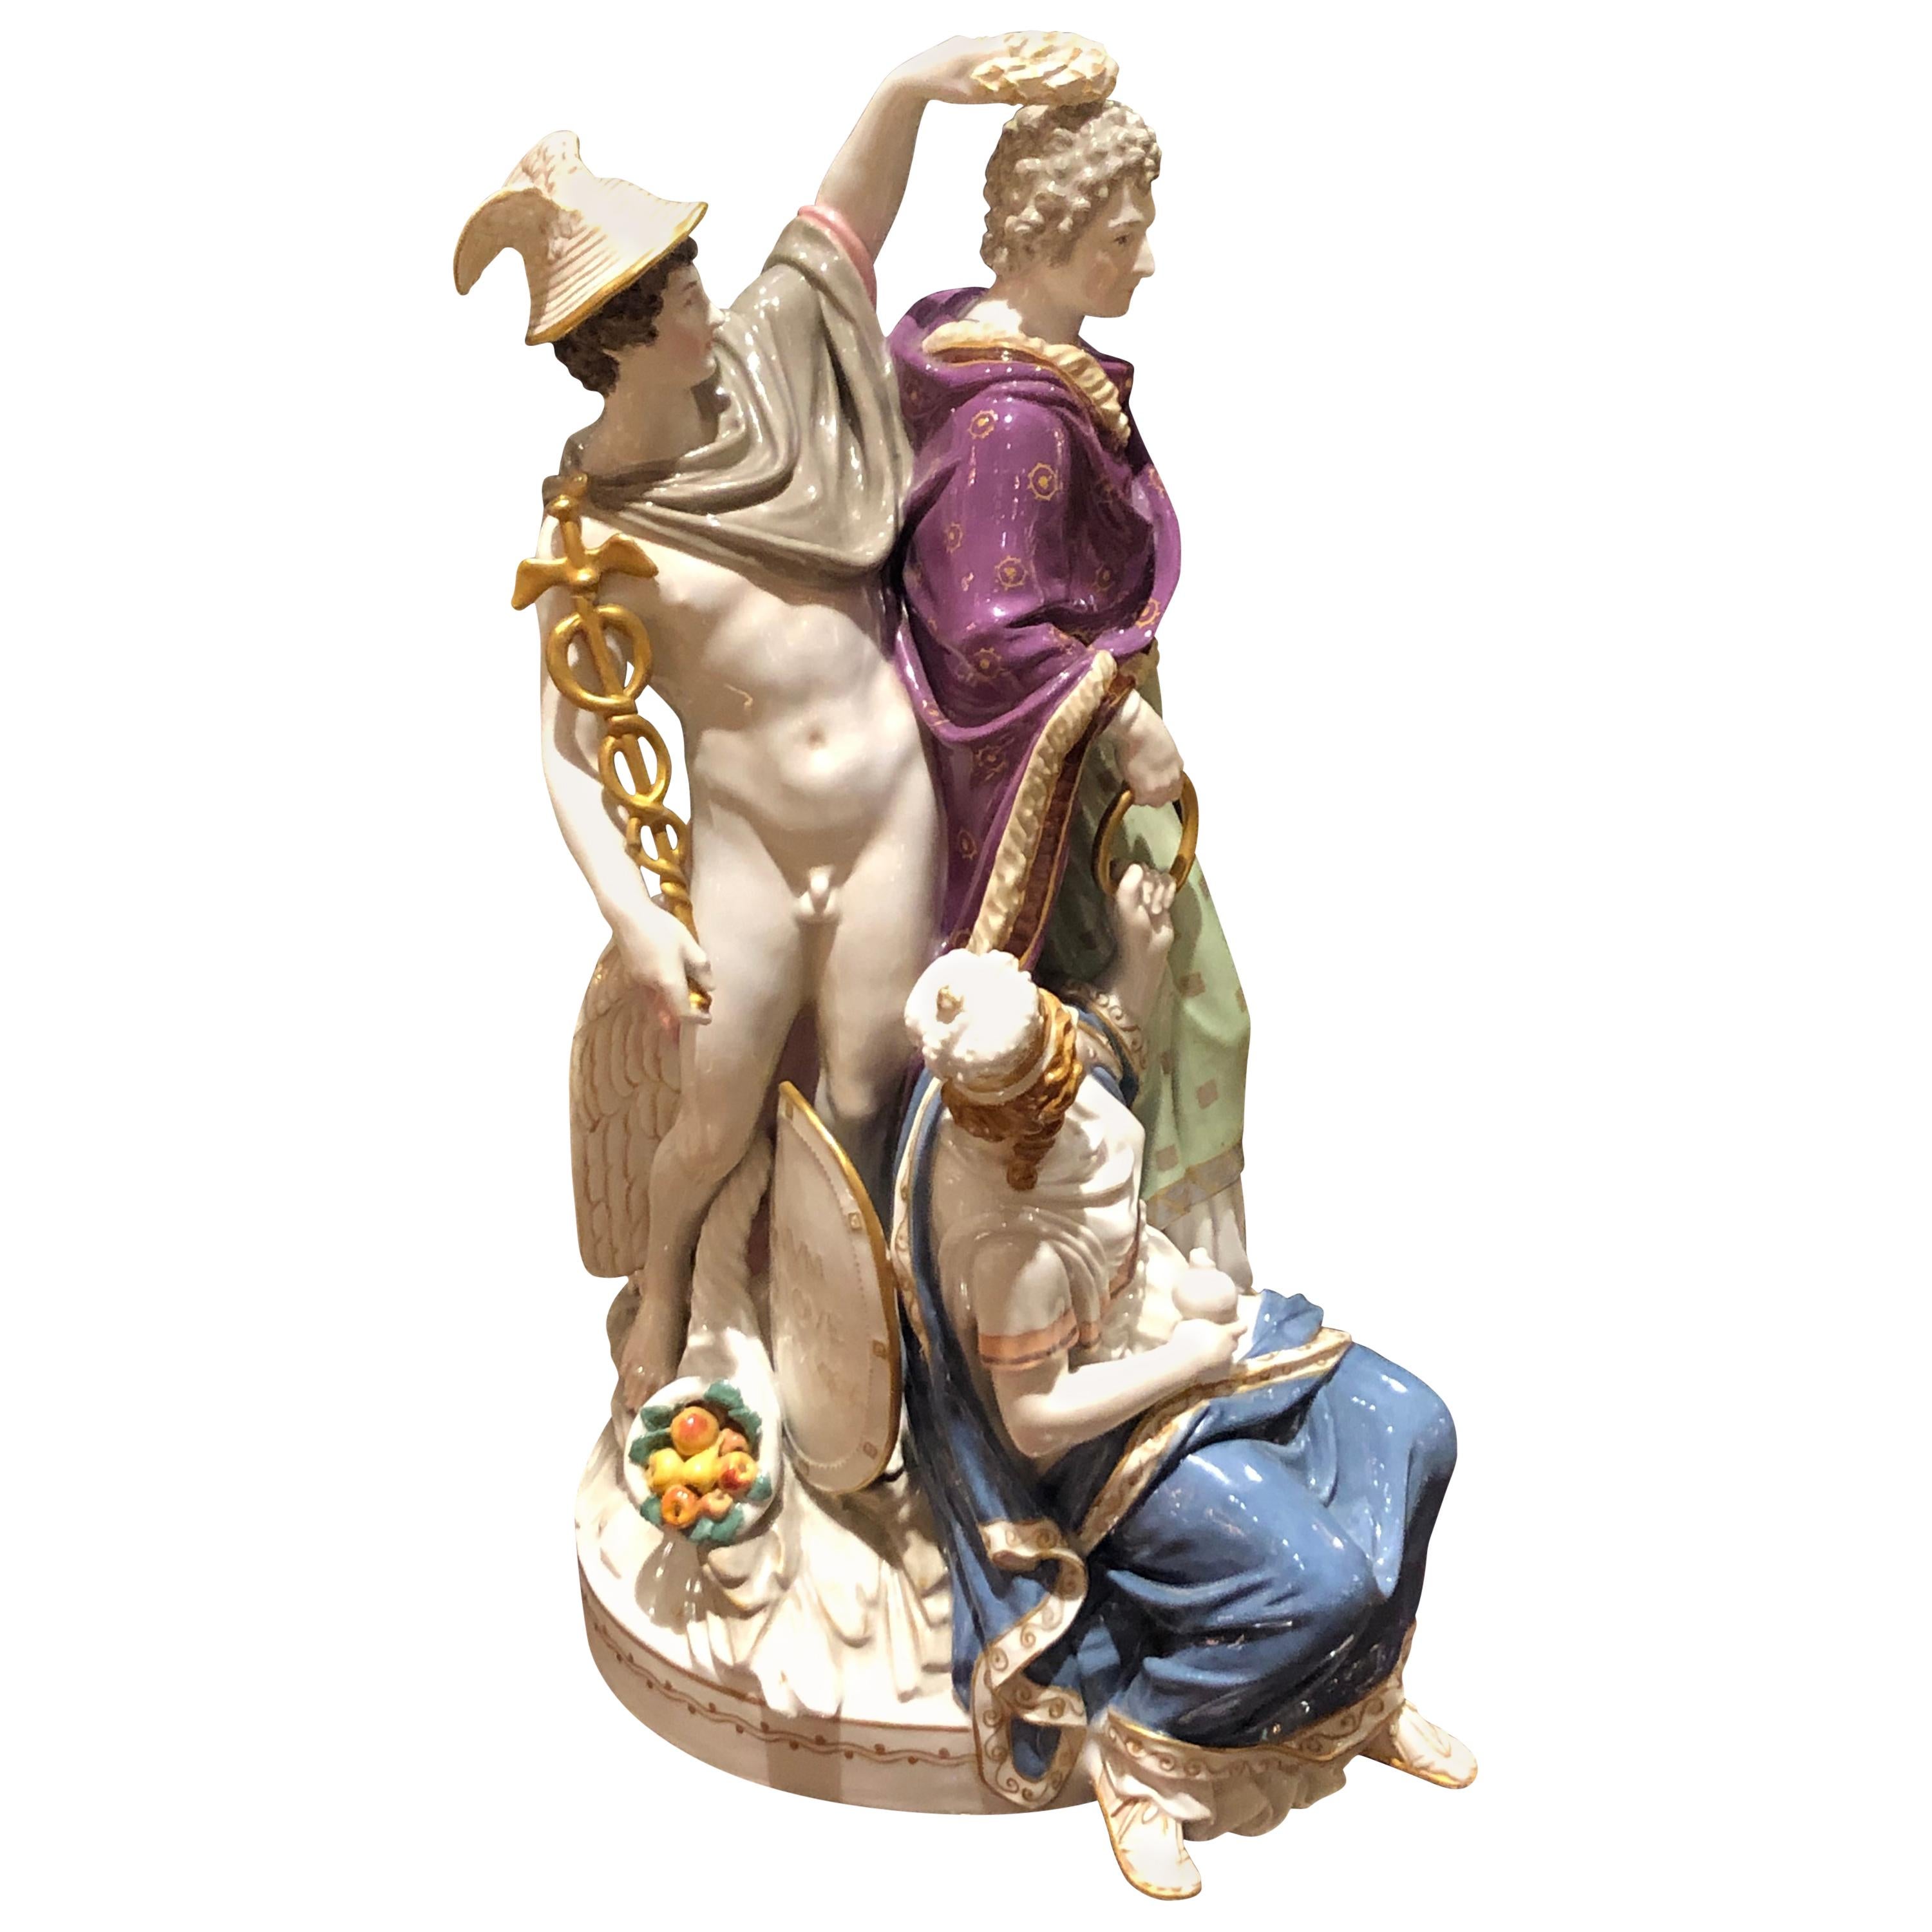 KPM Porcelain Figurines Group of the Crowning of Caesar